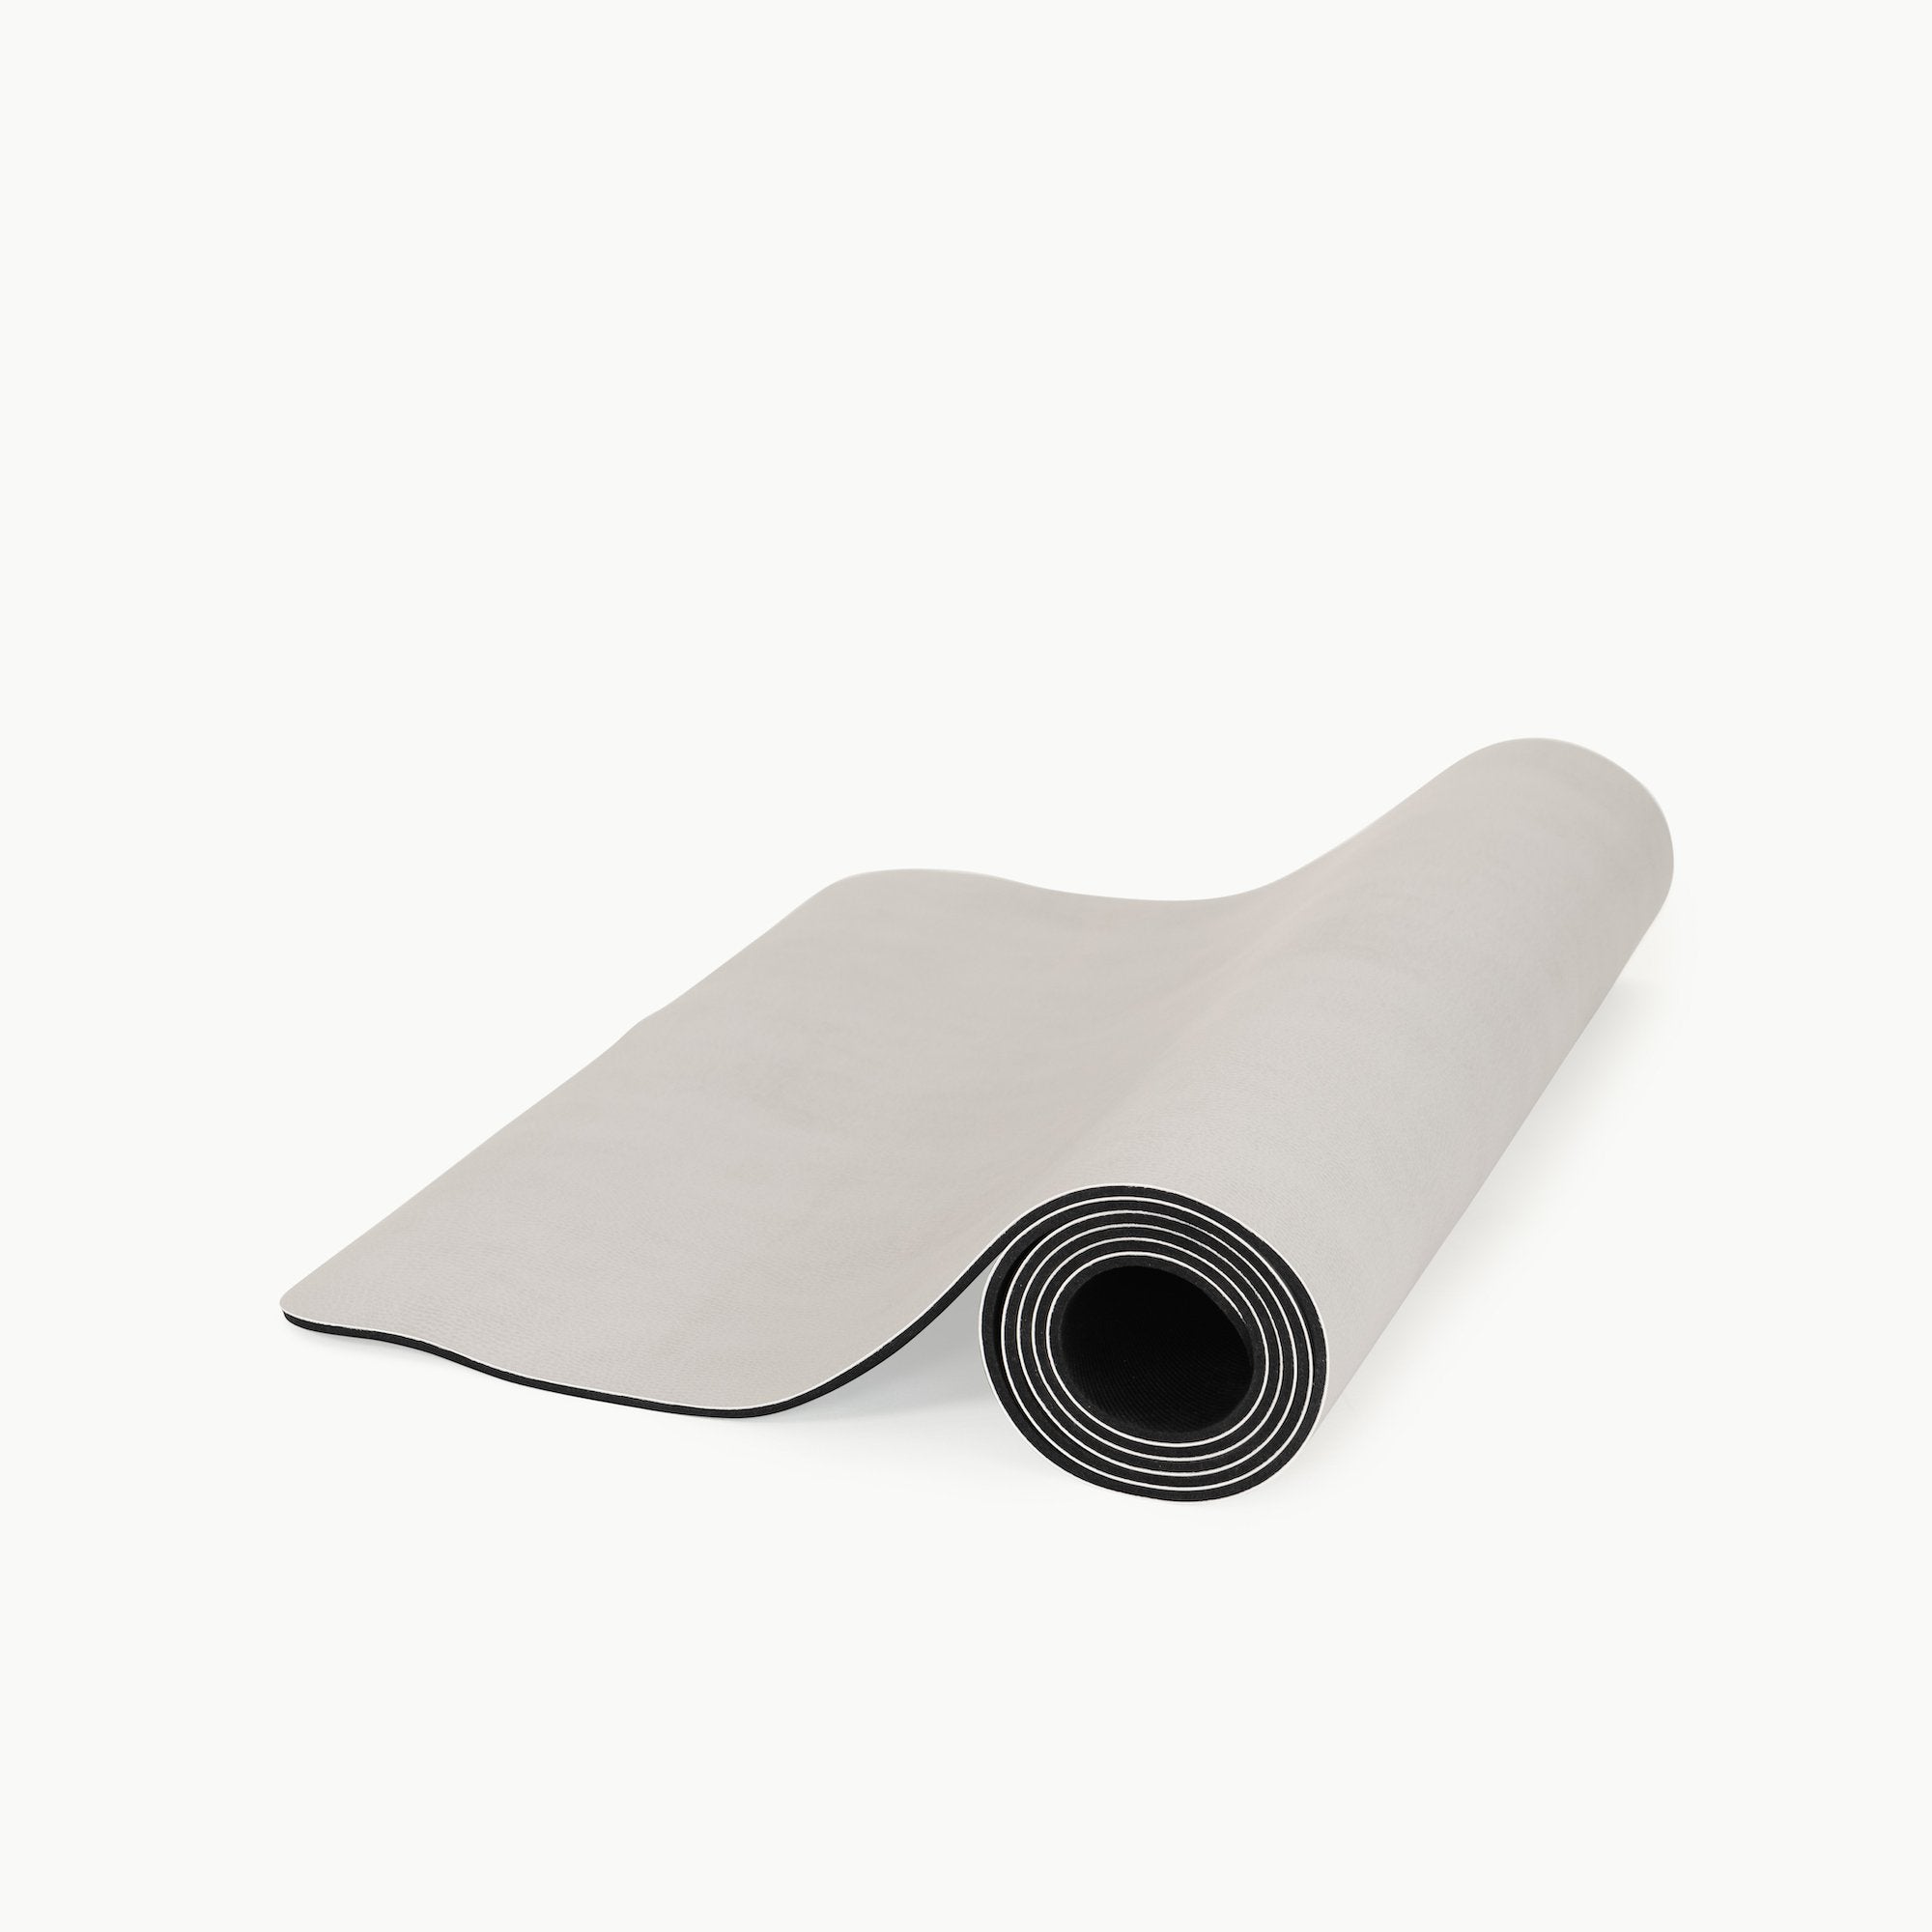 Pewter (on sale)@The Medium Pewter Home Mat rolled up